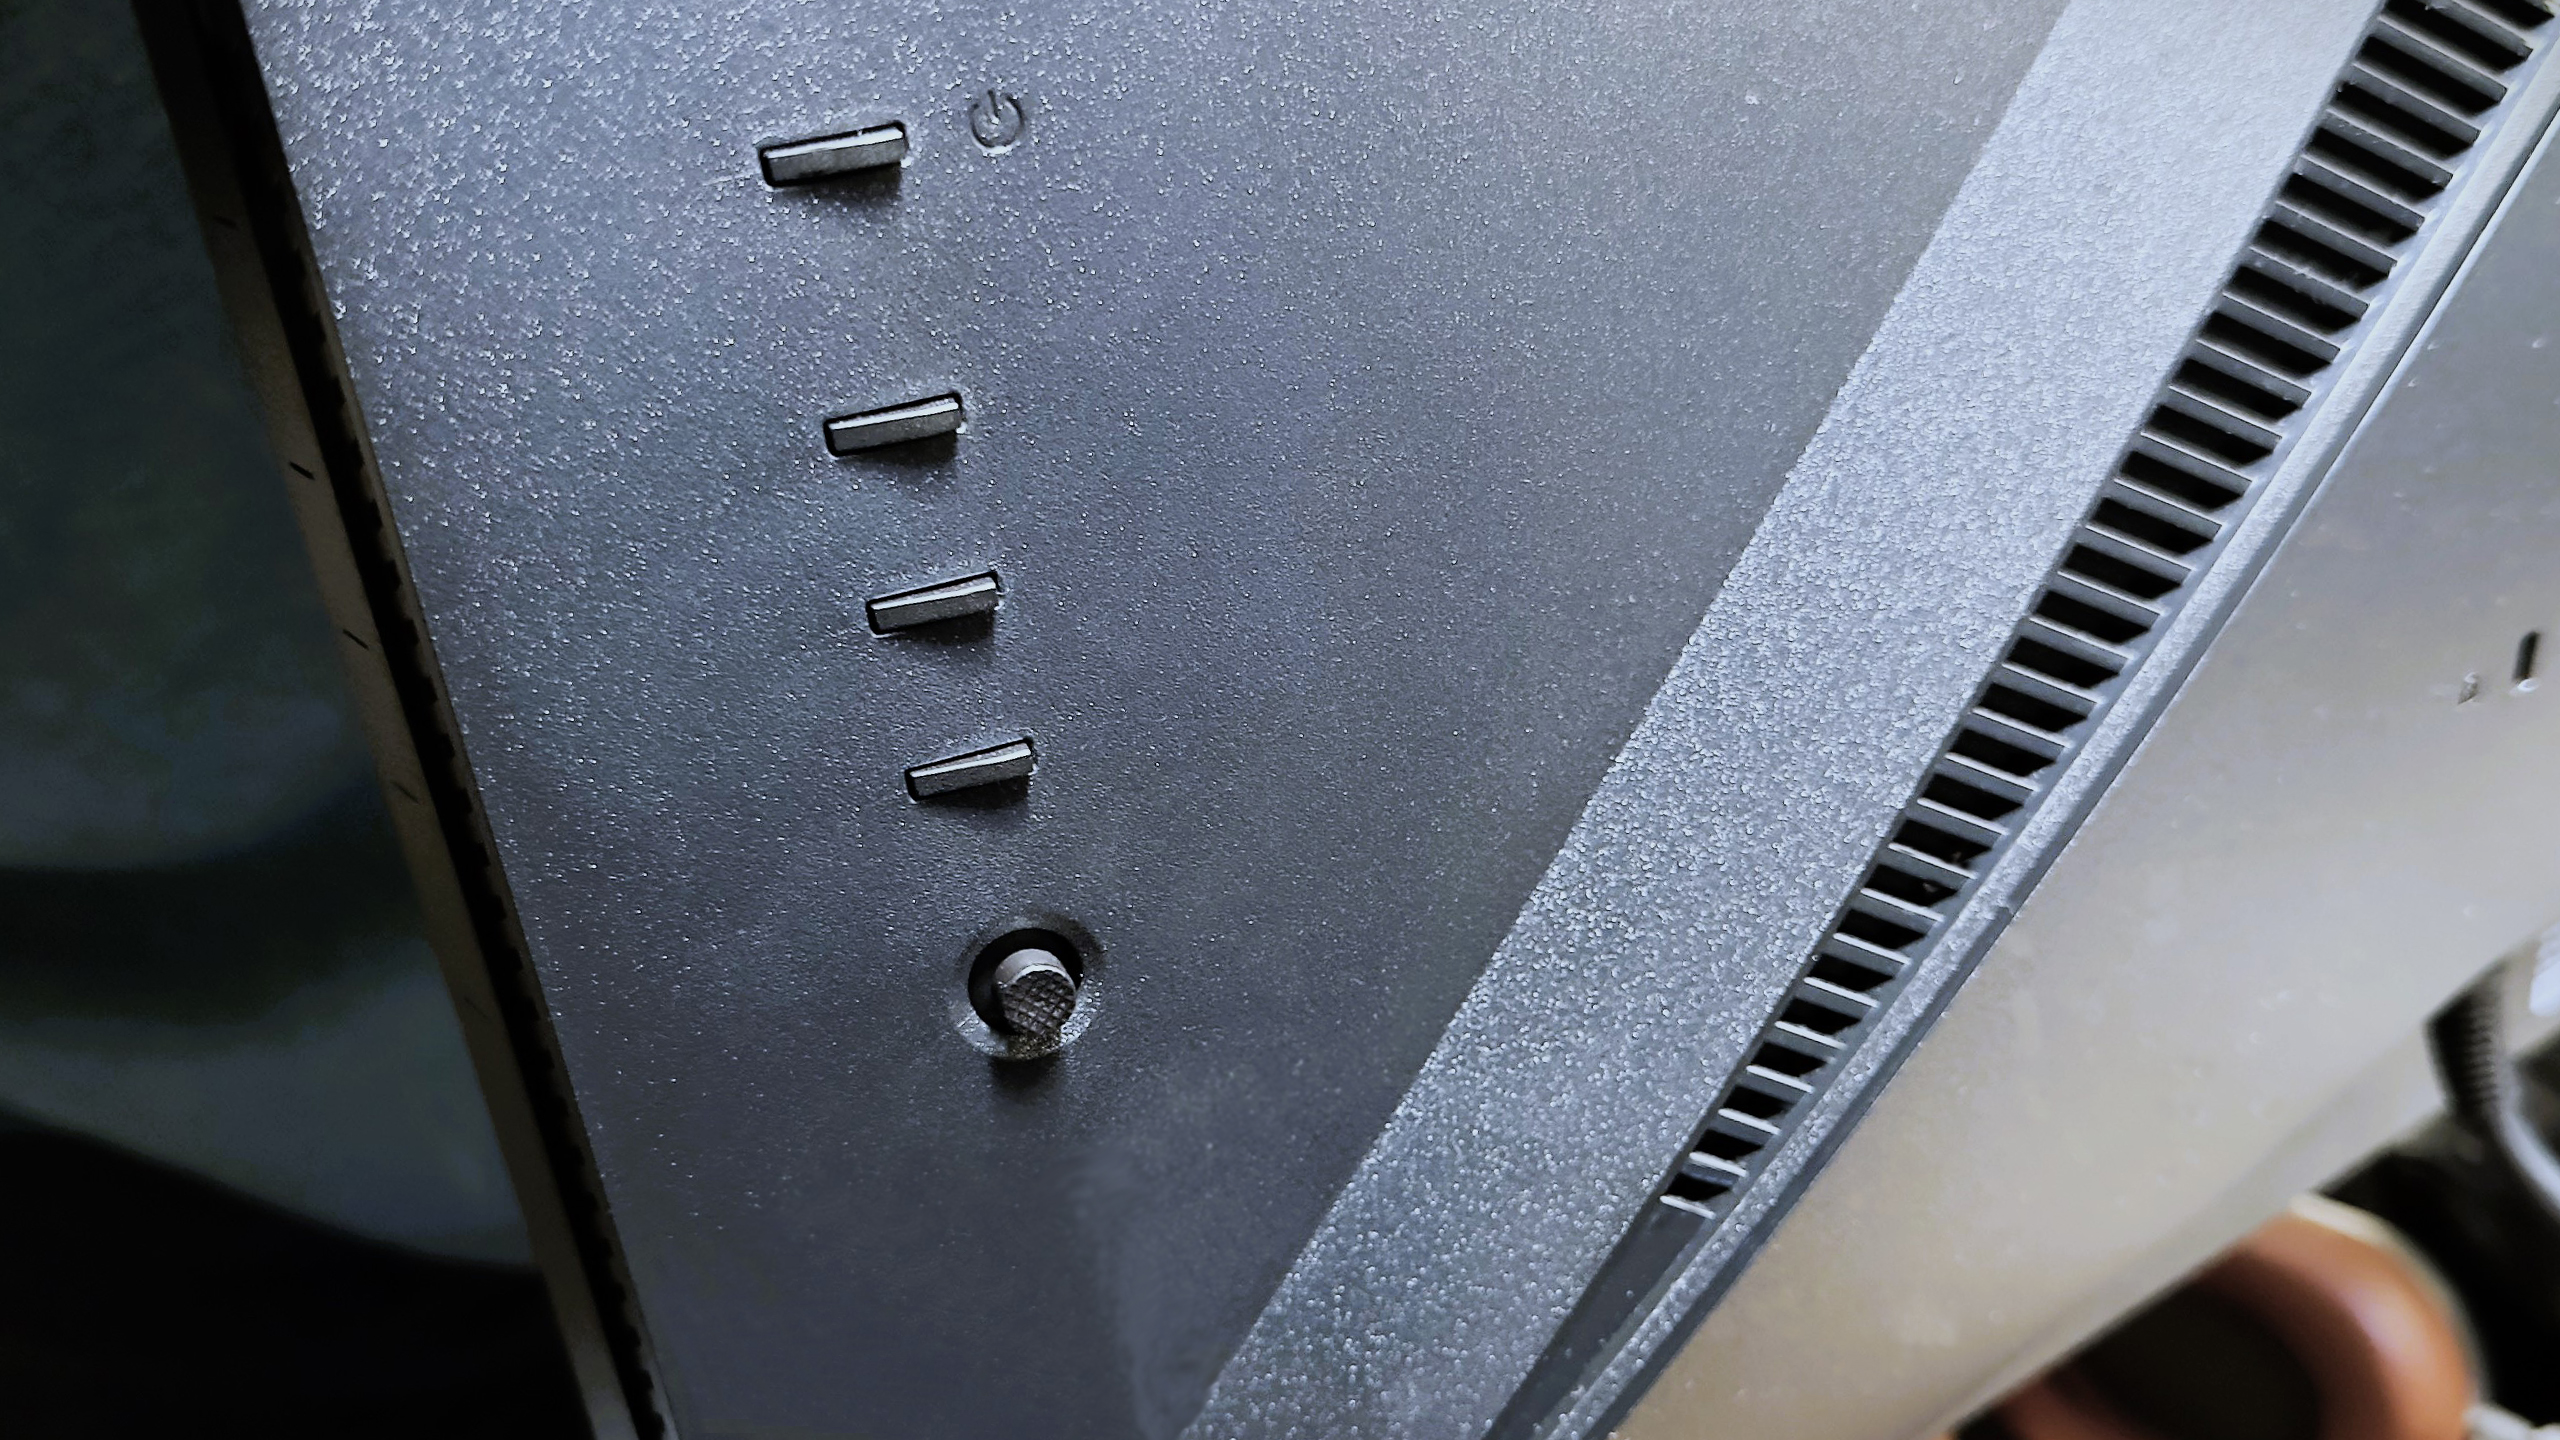 The Acer Predator X32 FP buttons.